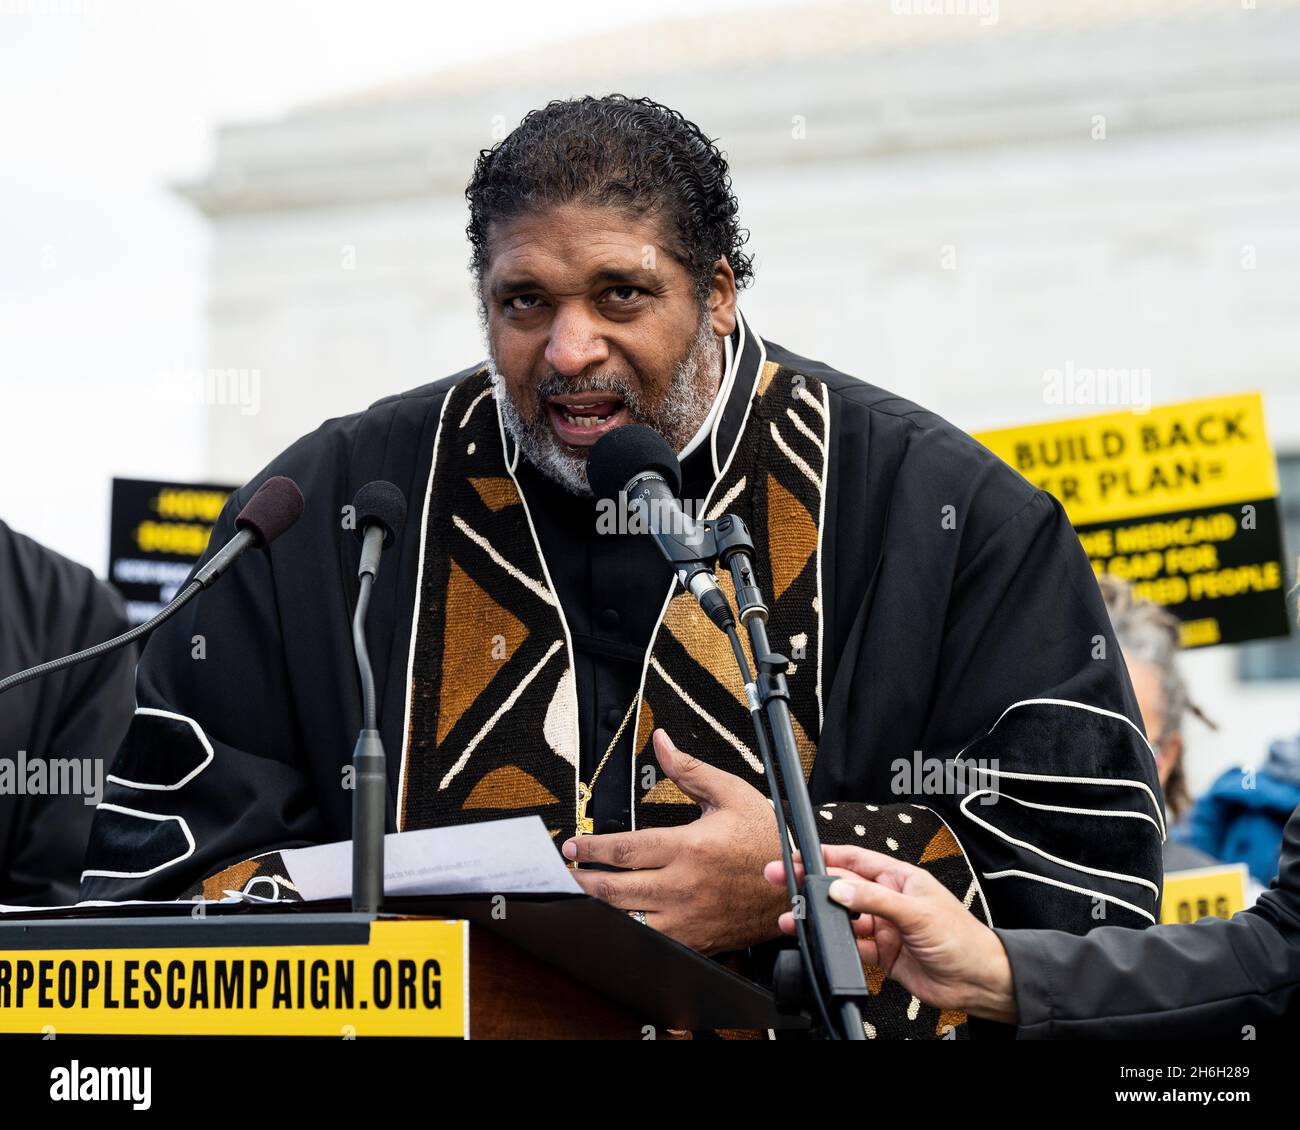 Washington, United States. 15th Nov, 2021. Reverend William Barber II, co-chair of the Poor People's Campaign: A National Call for Moral Revival, speaks at a rally in front of the Supreme Court in favor of the Build Back Better legislation that is being considered in Congress. Credit: SOPA Images Limited/Alamy Live News Stock Photo